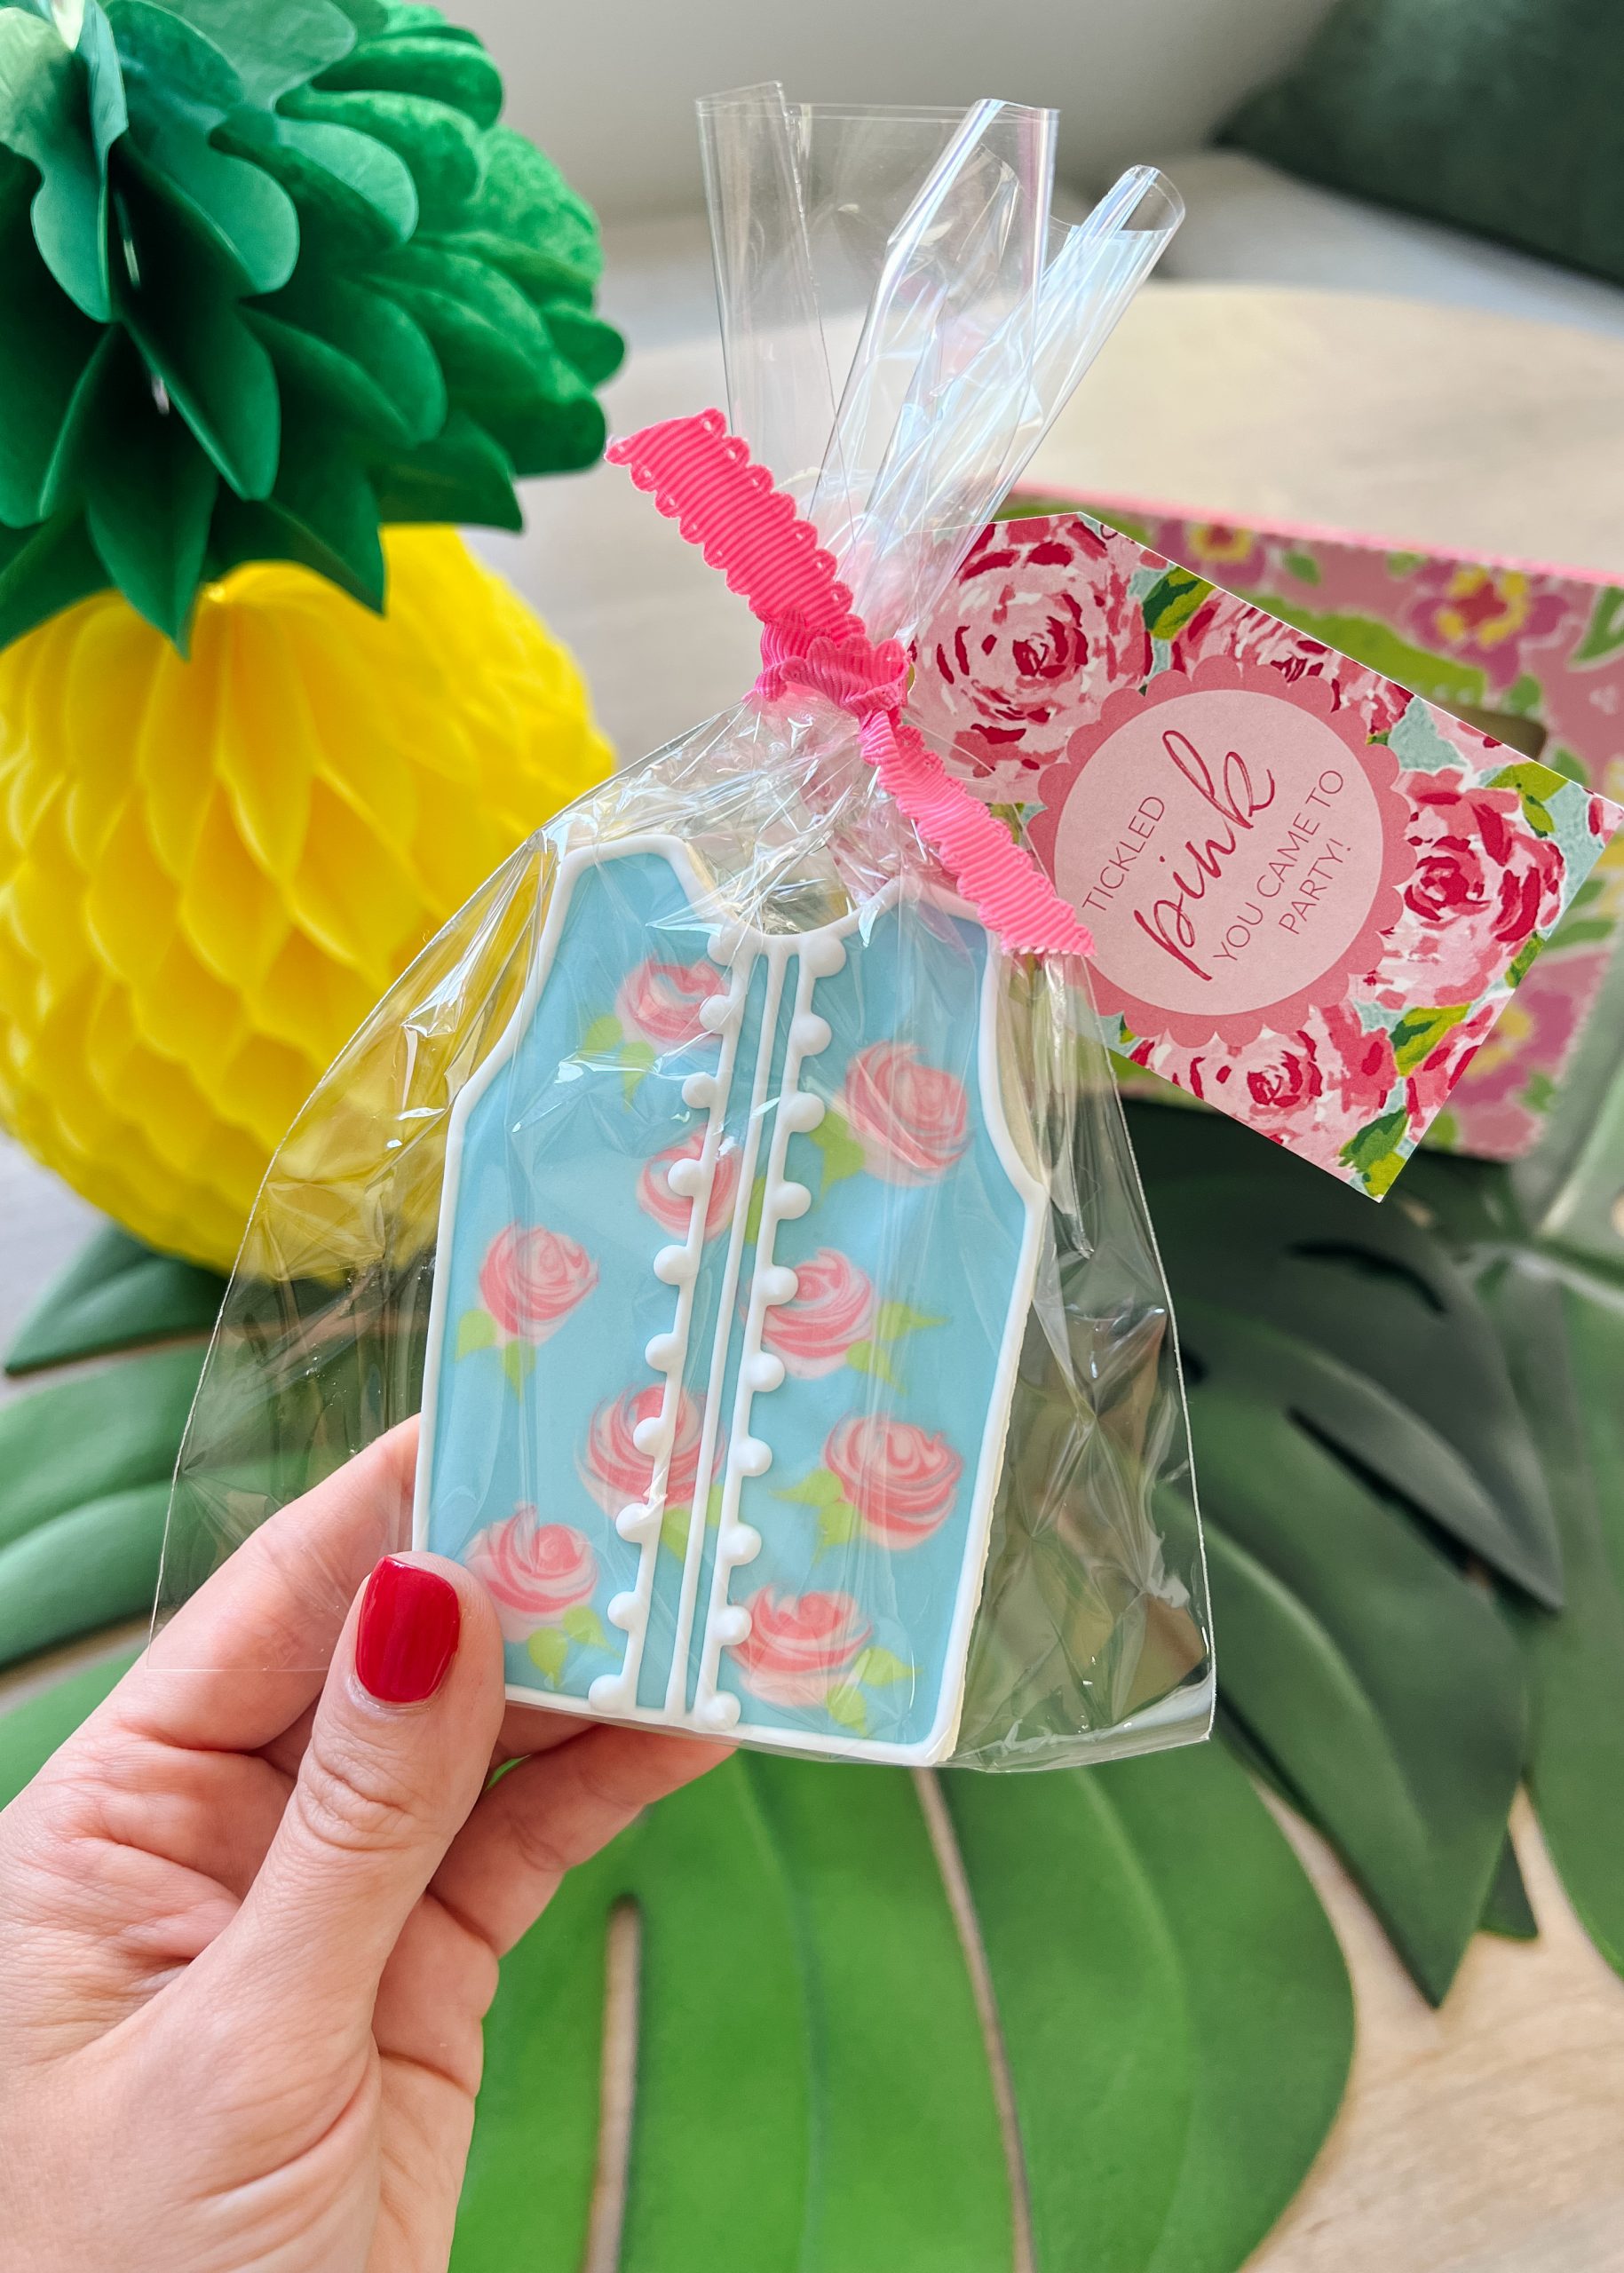 Lilly Pulitzer cookies